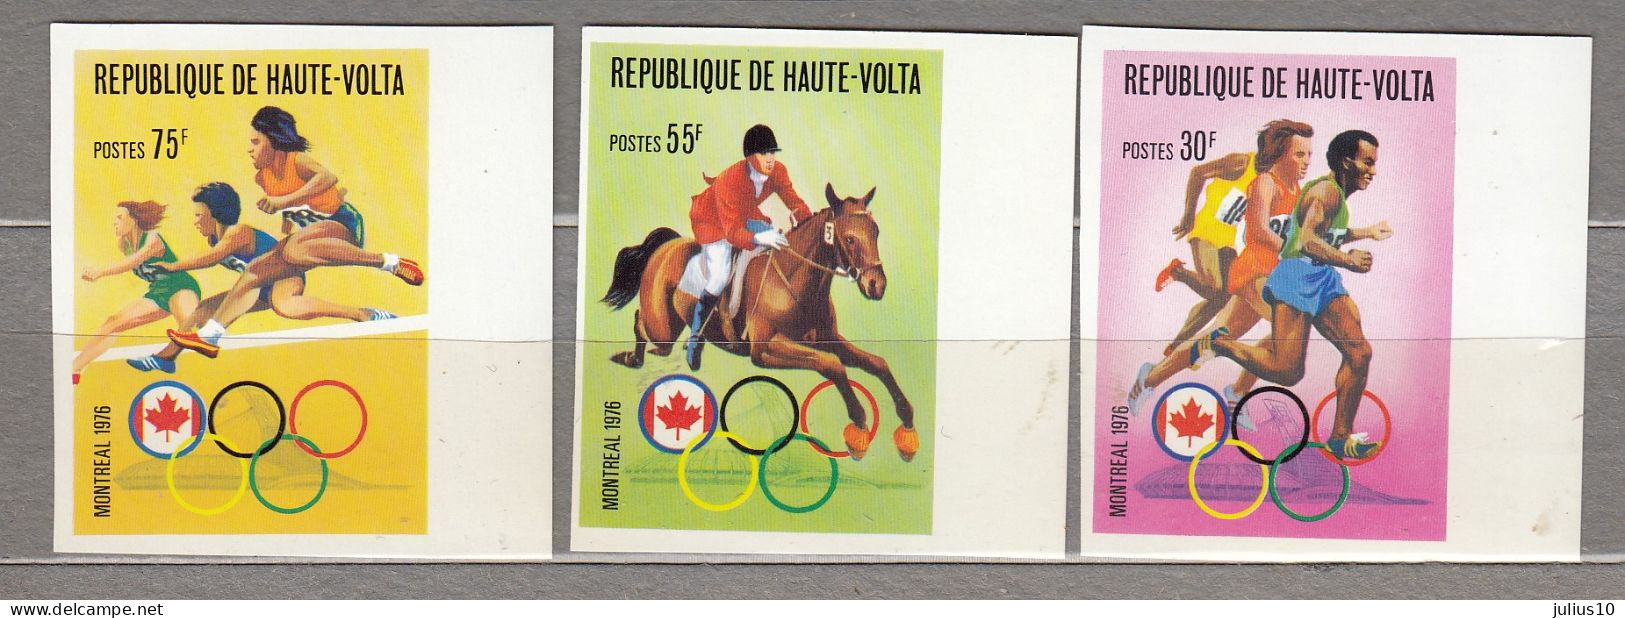 HAUTE VOLTA Imperforated 1976 Sport Olympic Games Mi 617-619, Sc 390-392 MNH (**) #33948 - Sommer 1976: Montreal